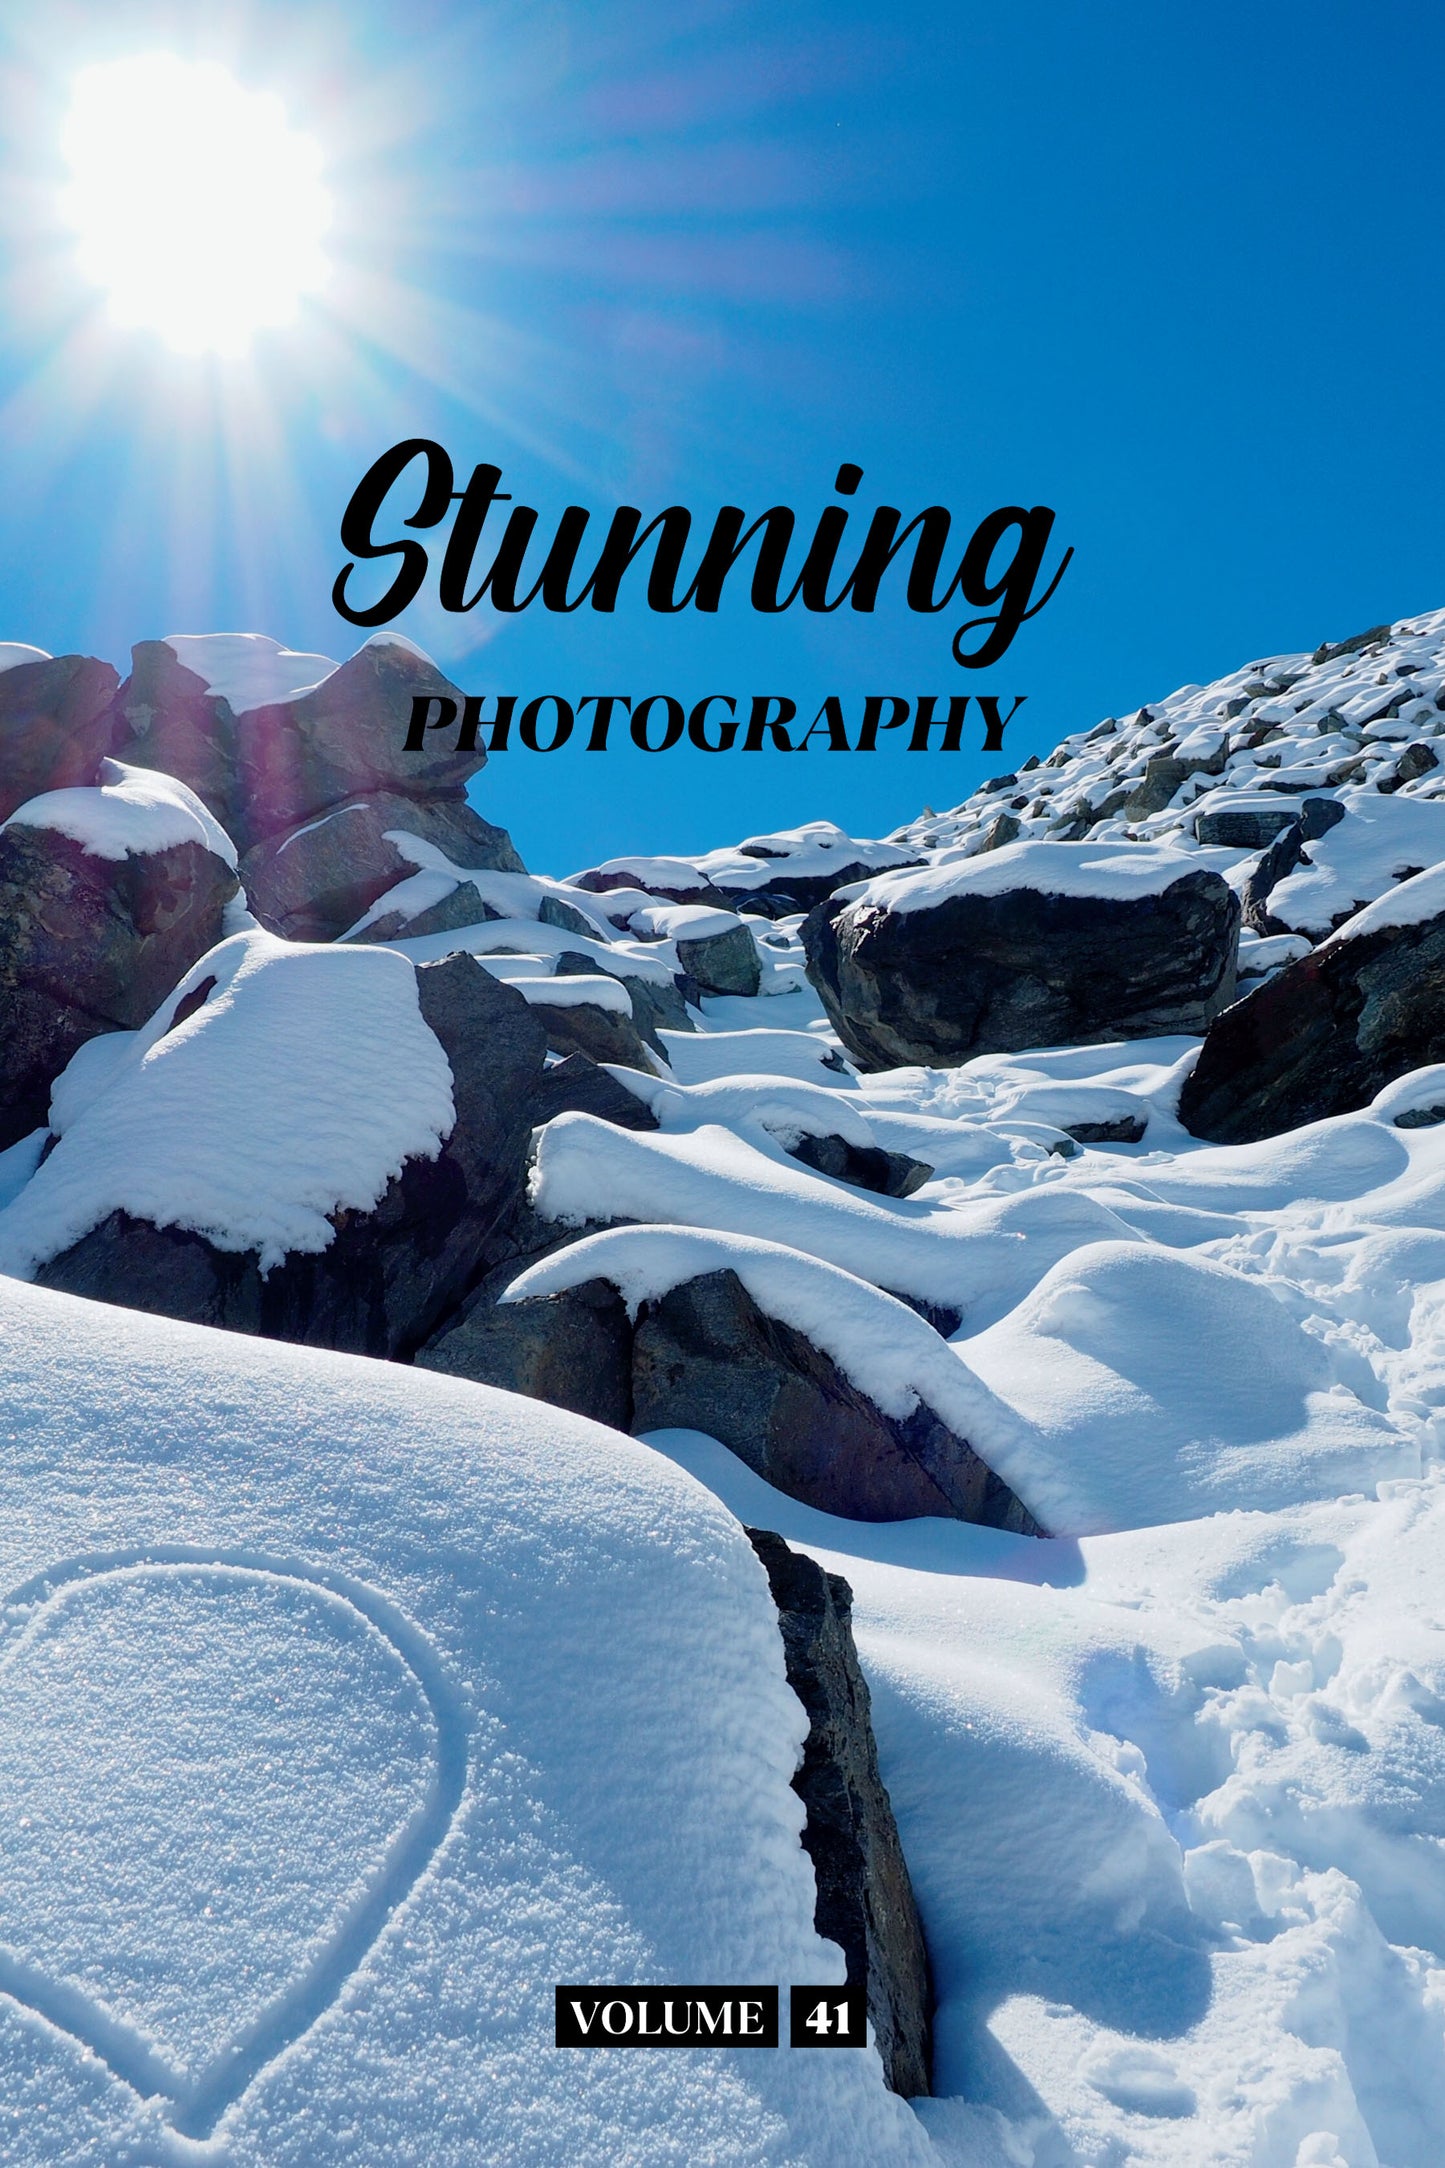 Stunning Photography Volume 41 (Physical Book Pre-Order)